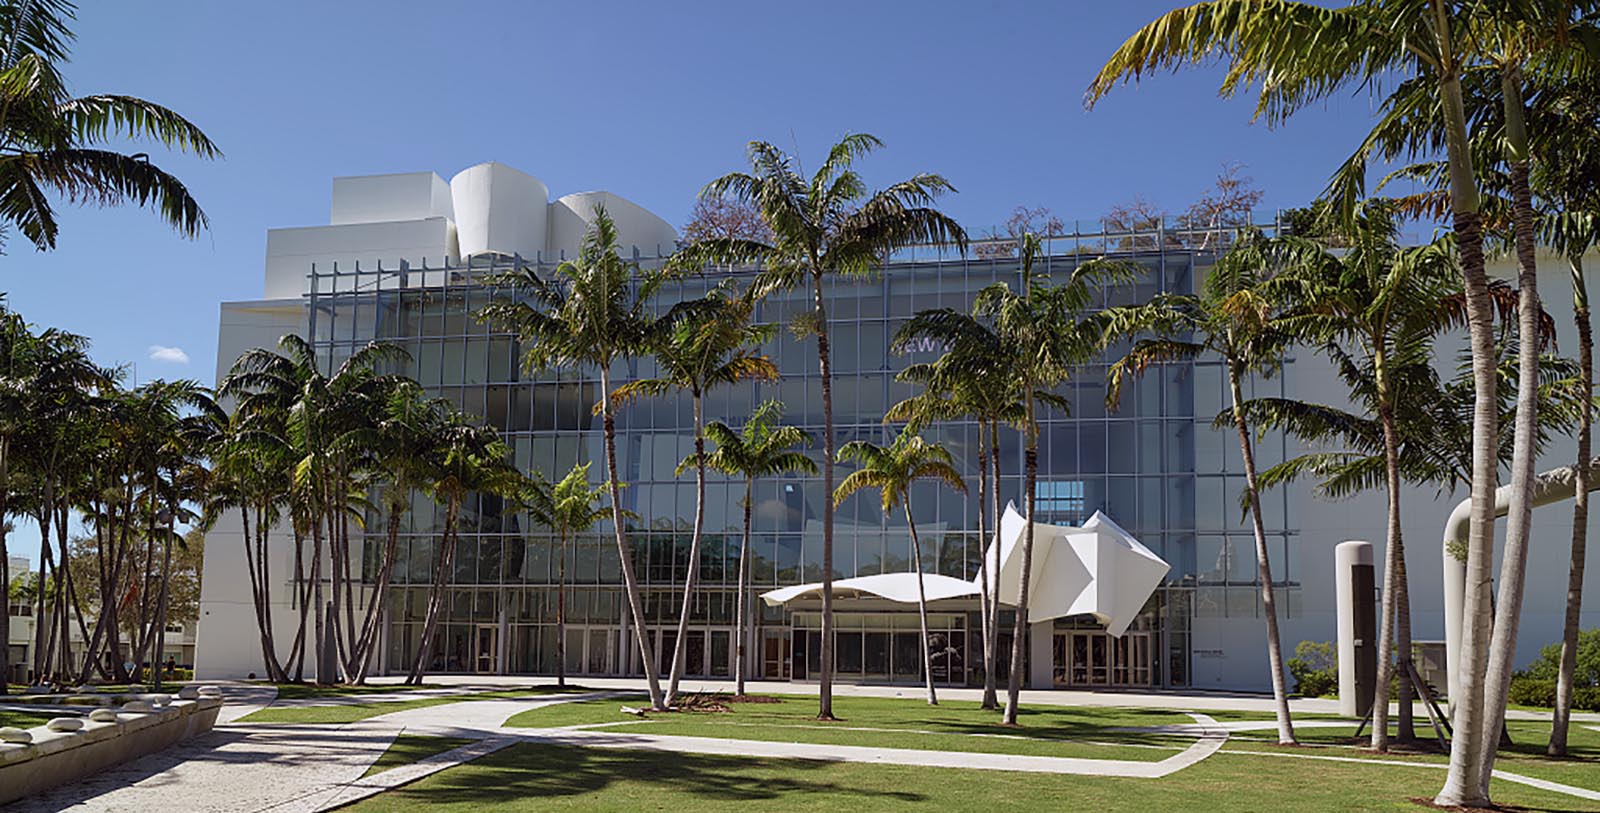 Explore outstanding cultural attractions such as New World Center and the Miami Beach Botanical Garden.